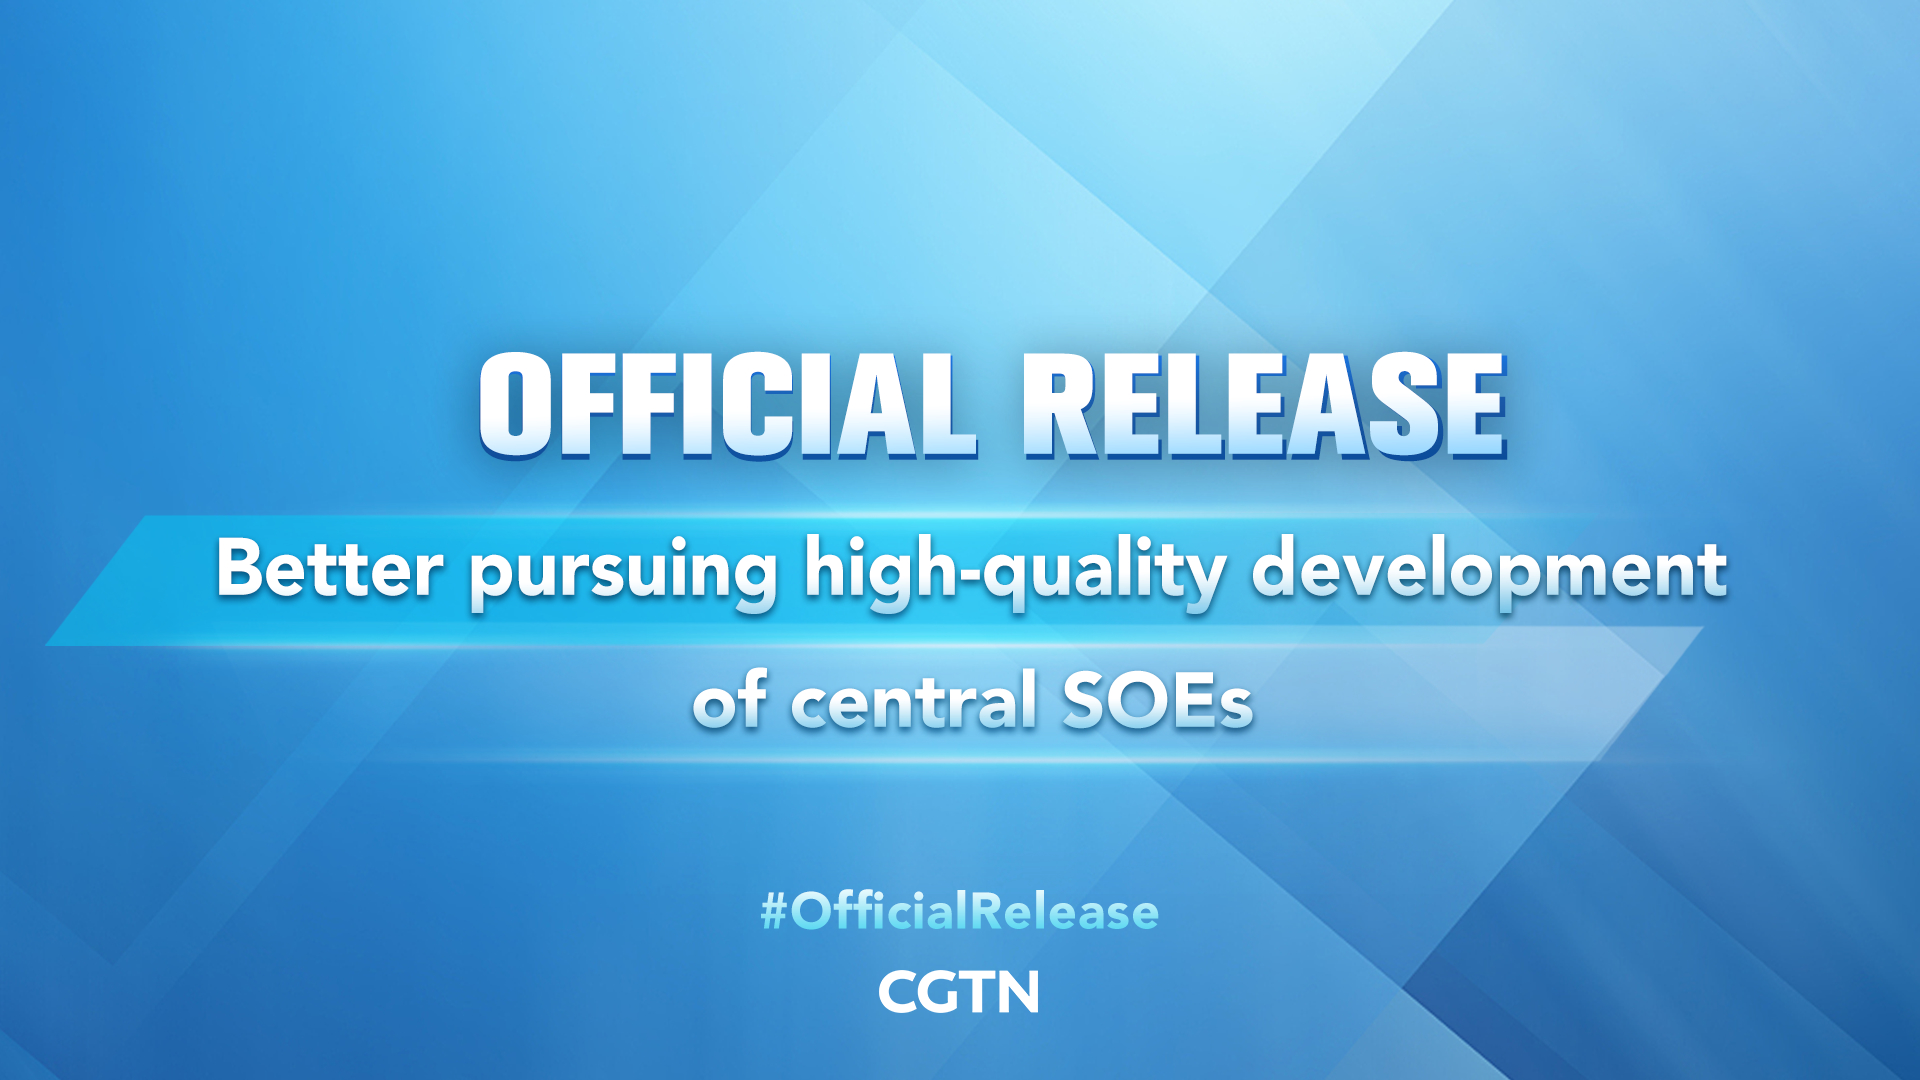 Live: SCIO briefs media on better pursuing high-quality development of central SOEs